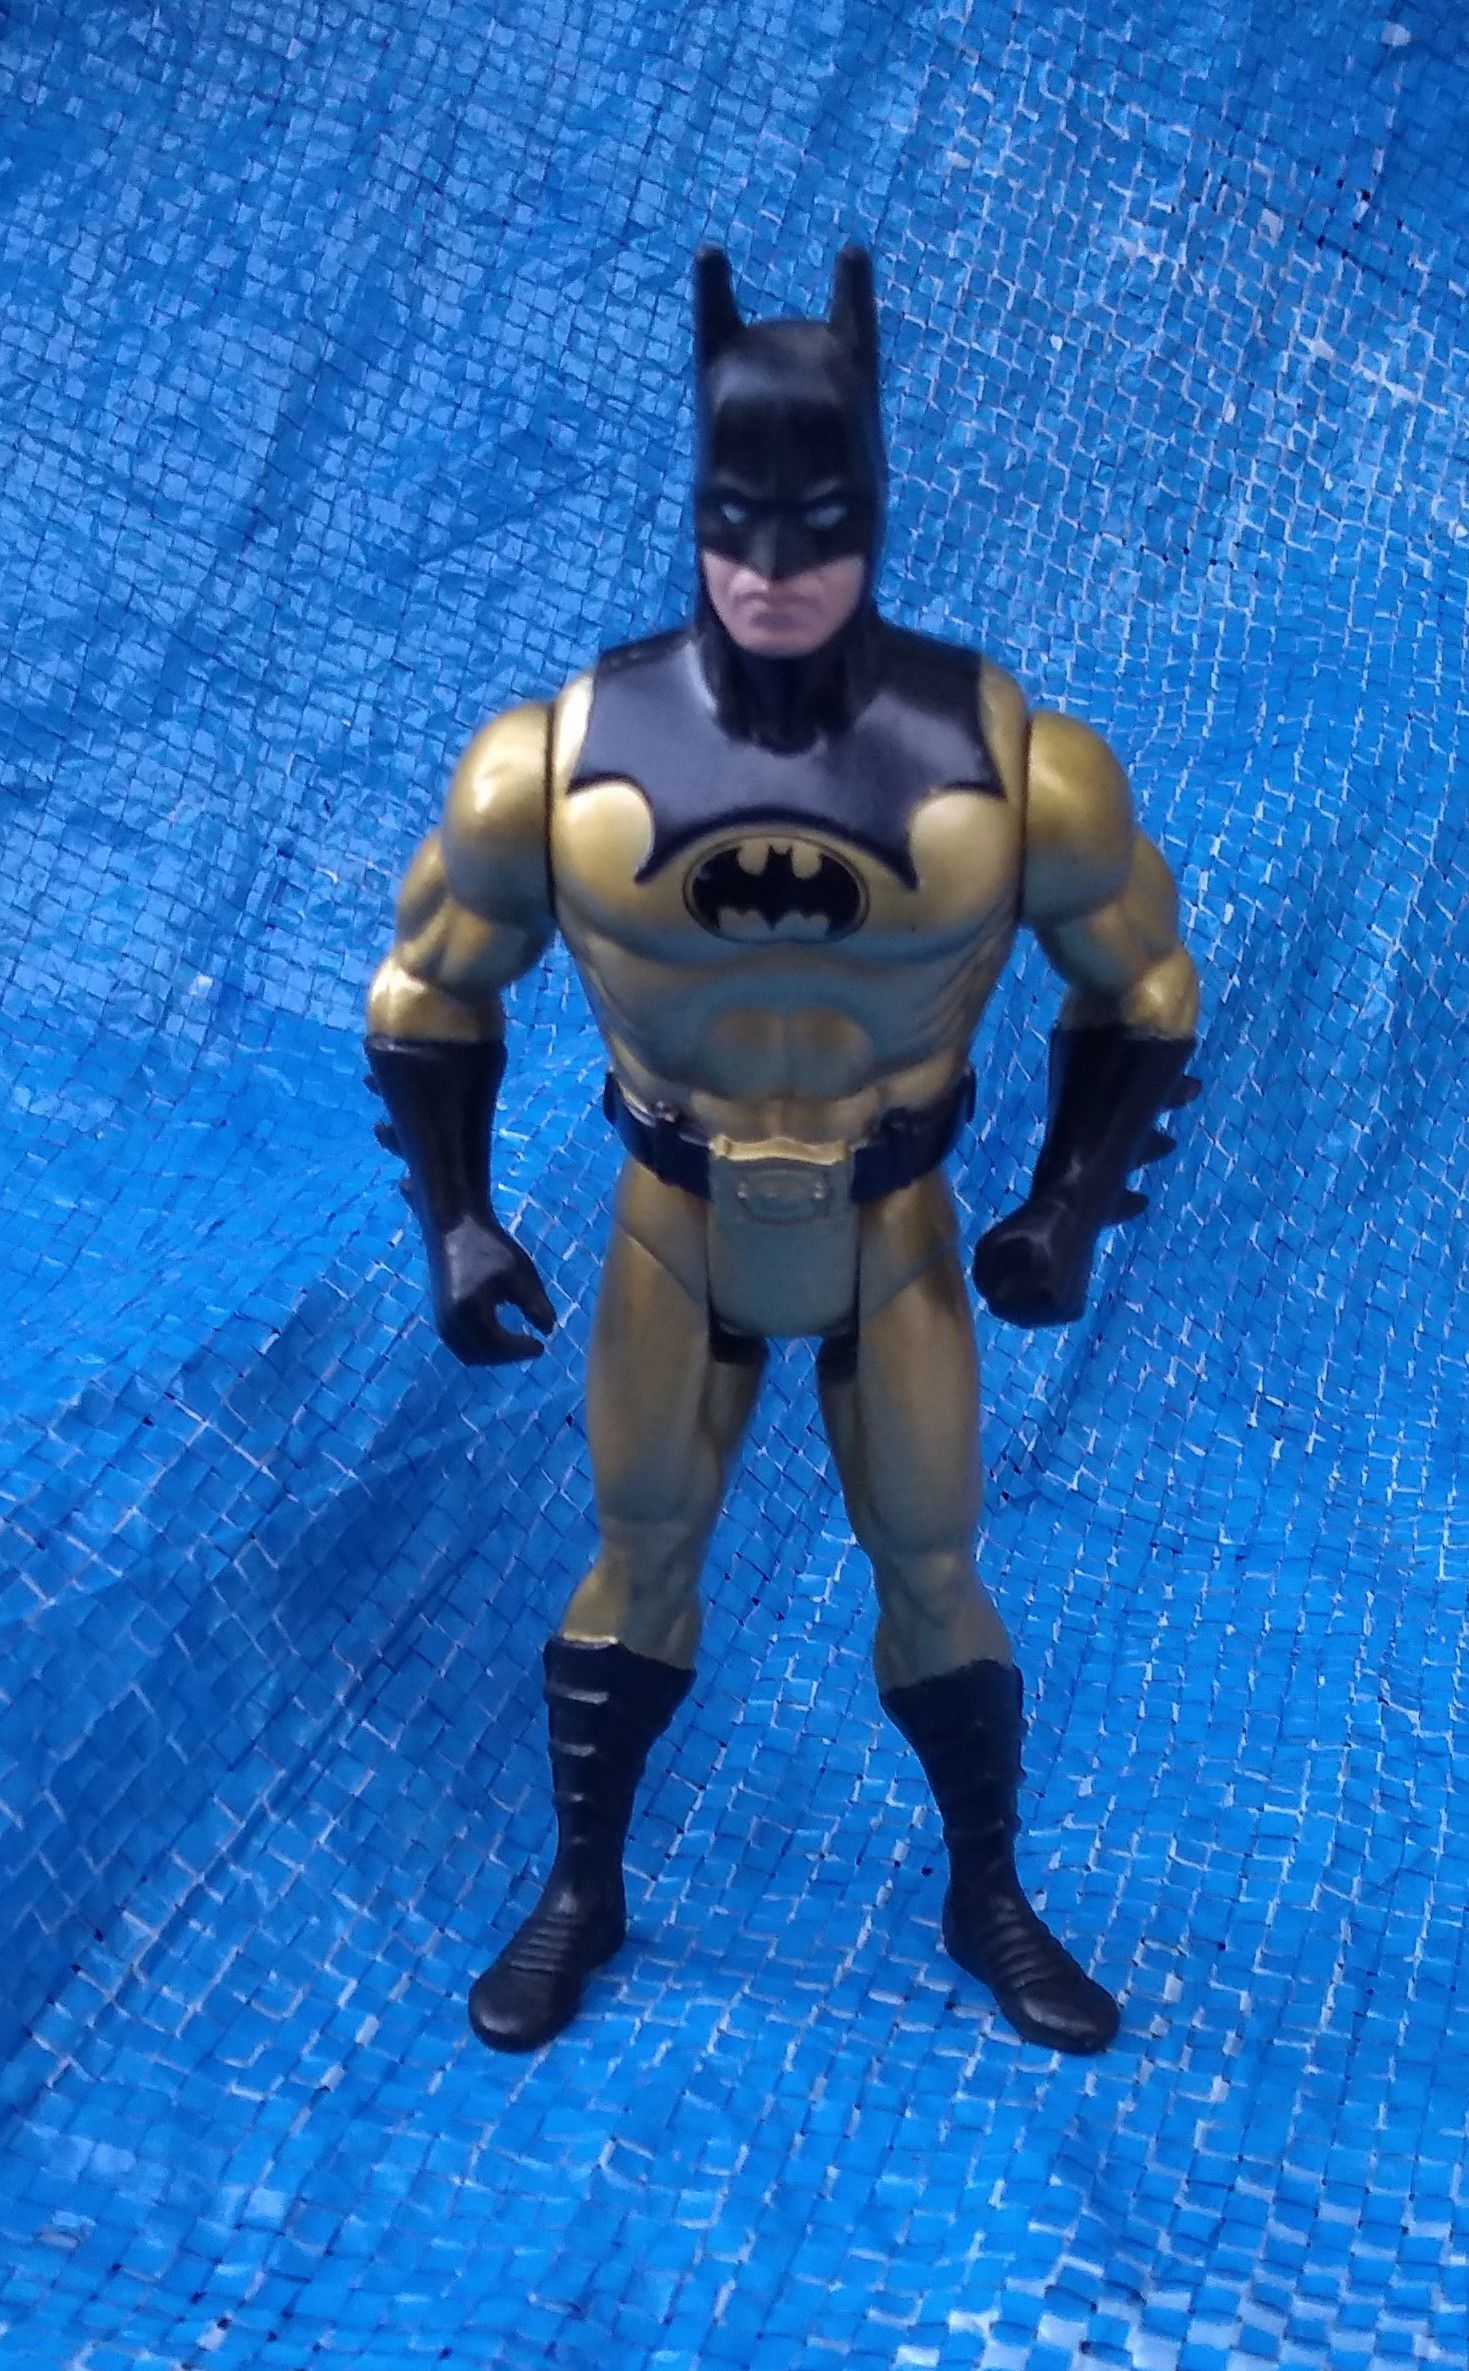 1990 Kenner The Dark Knight Collection Tec-Shield Batman Action Figure DC Comics Vintage Collectible